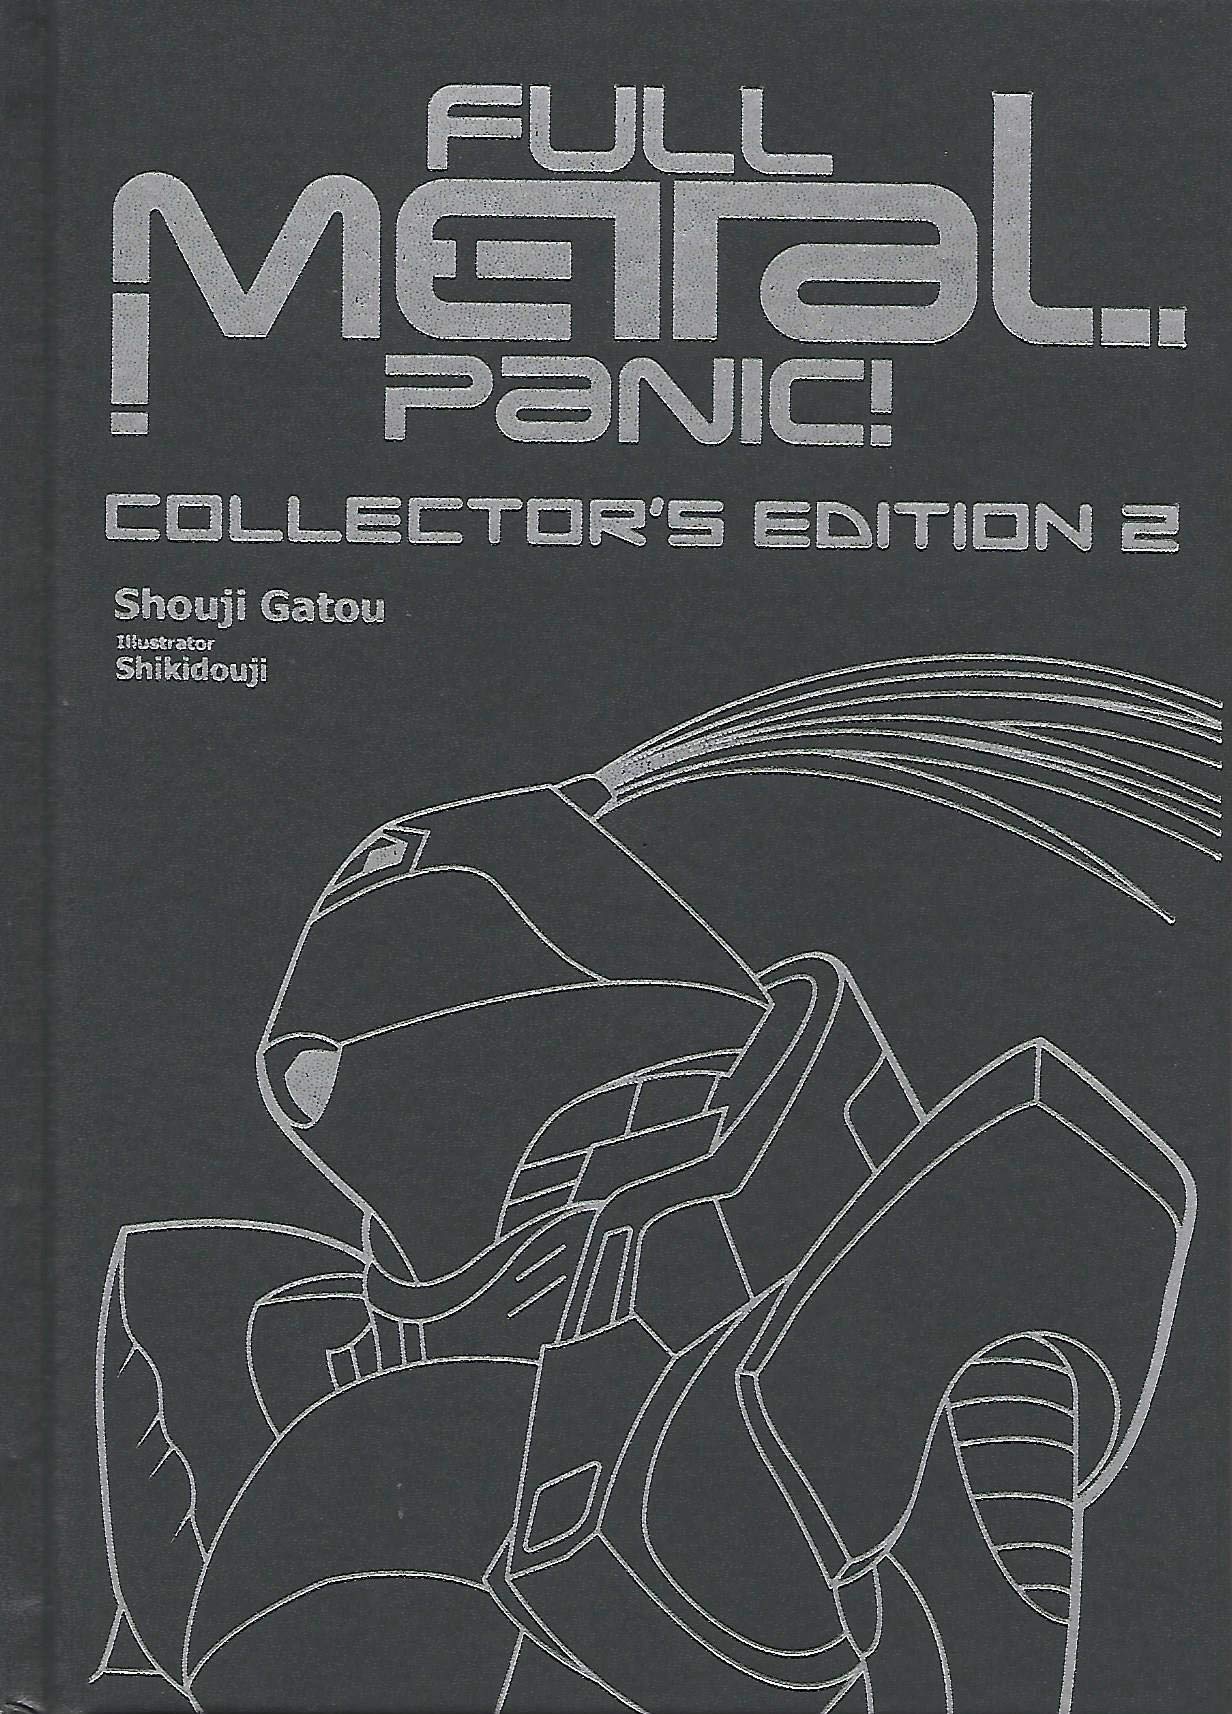 Full Metal Panic! Volumes 04-06 Collector's Edition